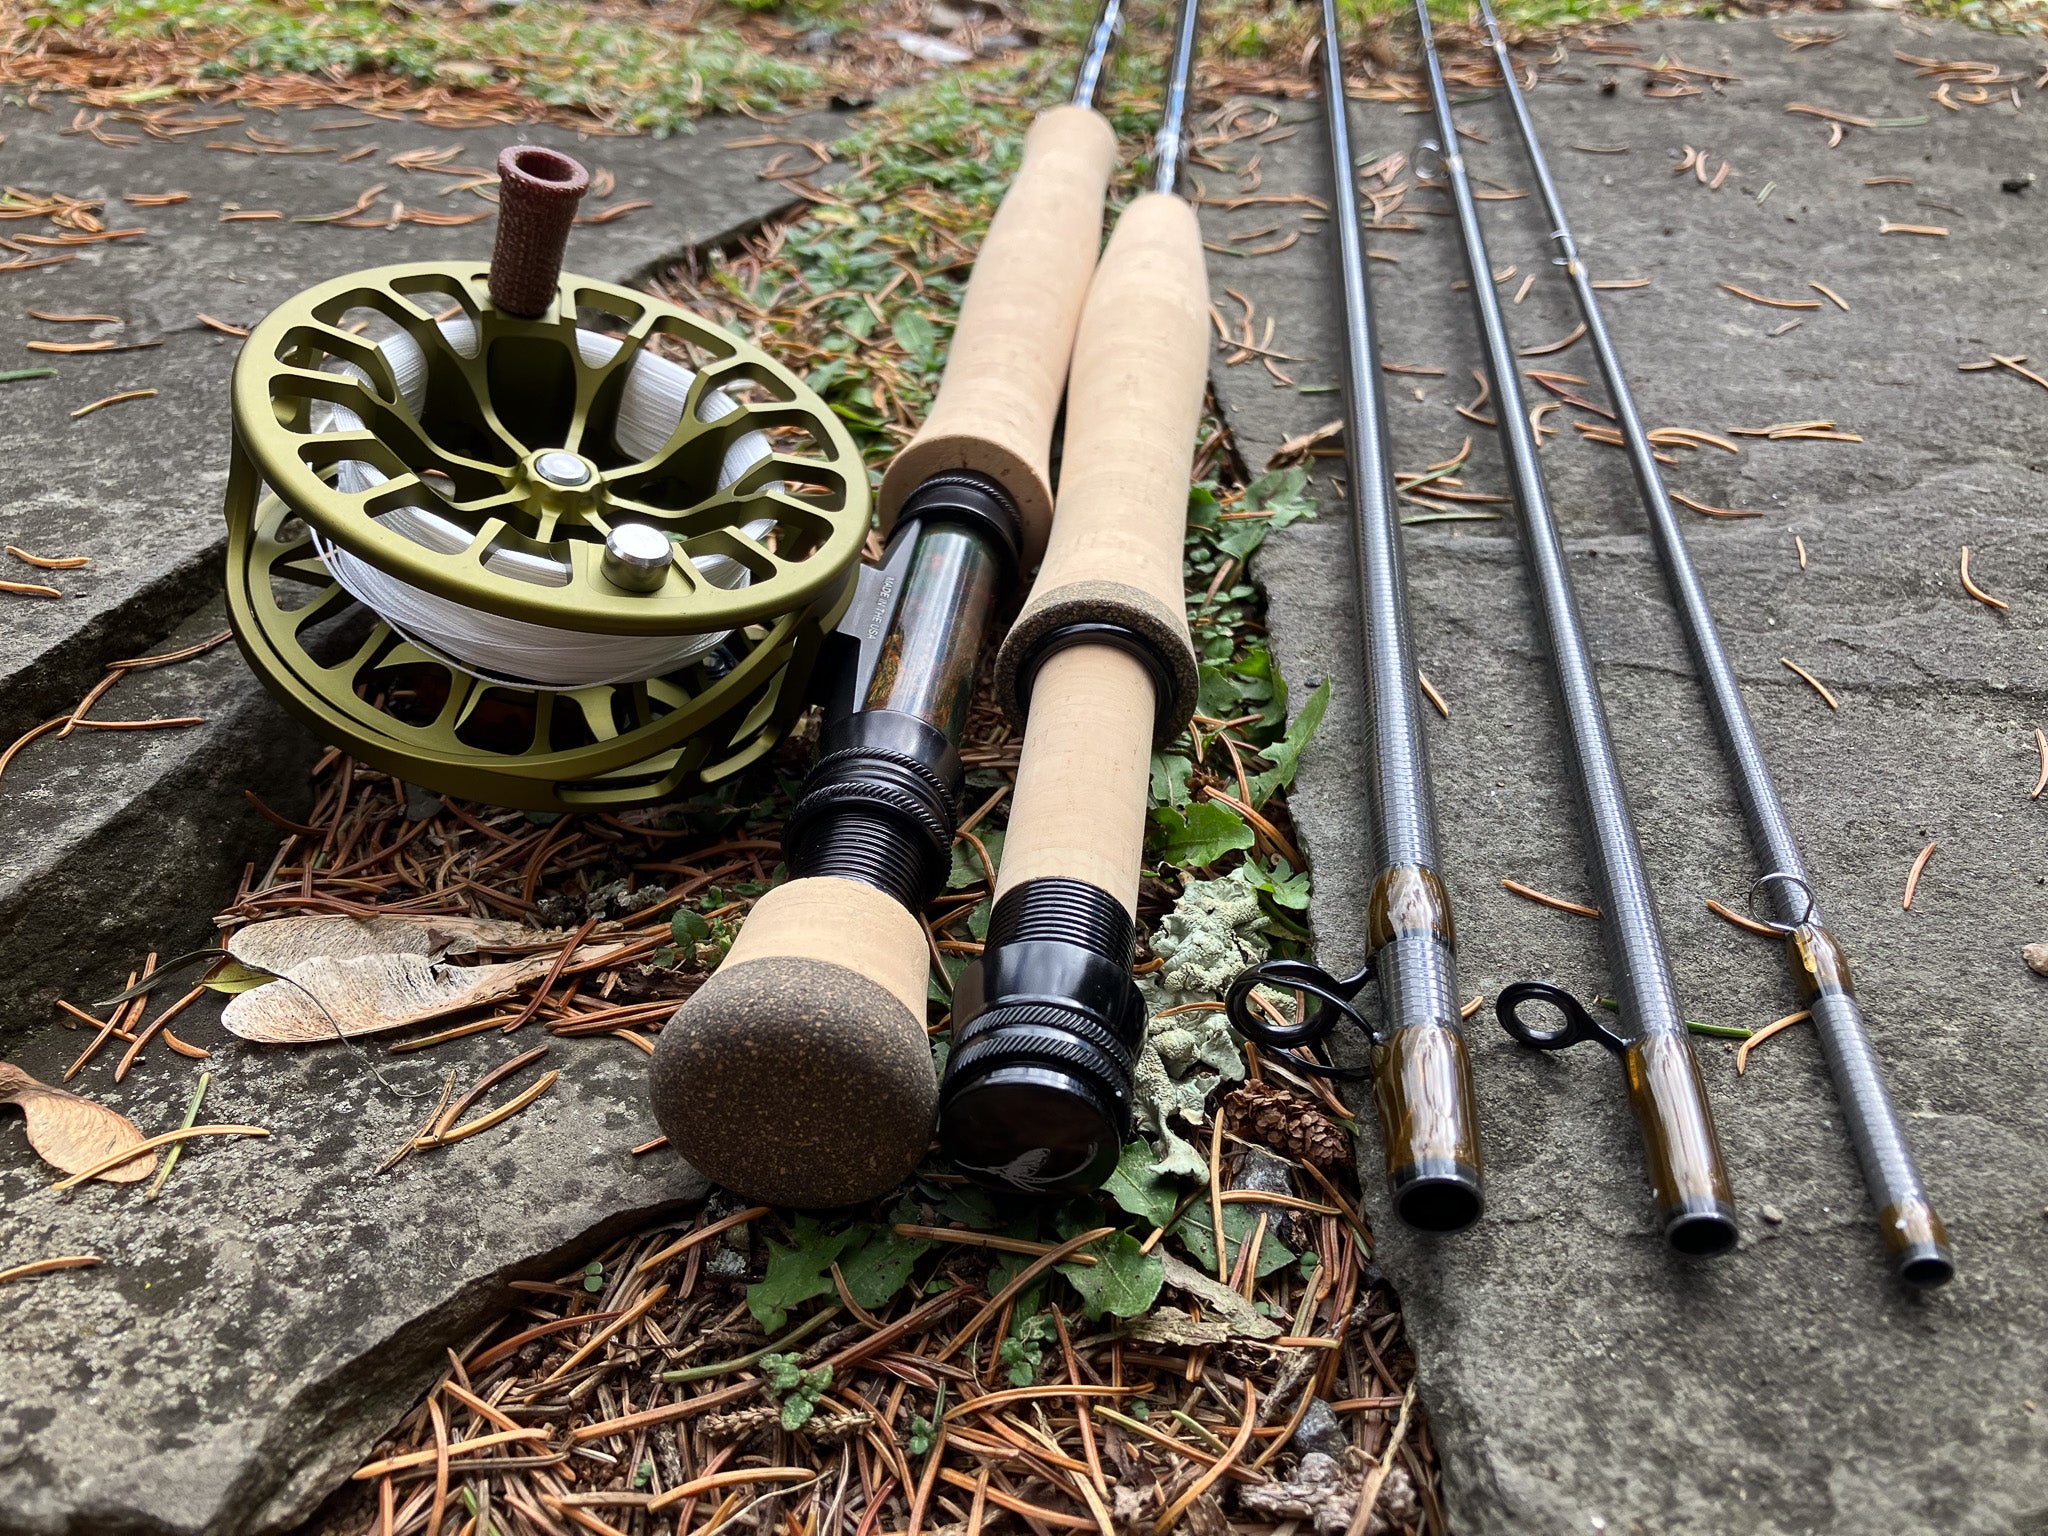 Peacemaker 10'6" 4 wt. 4 pc. & 8'0" 3-4 wt. 3 pc. 2 rods in one. Choose options below.